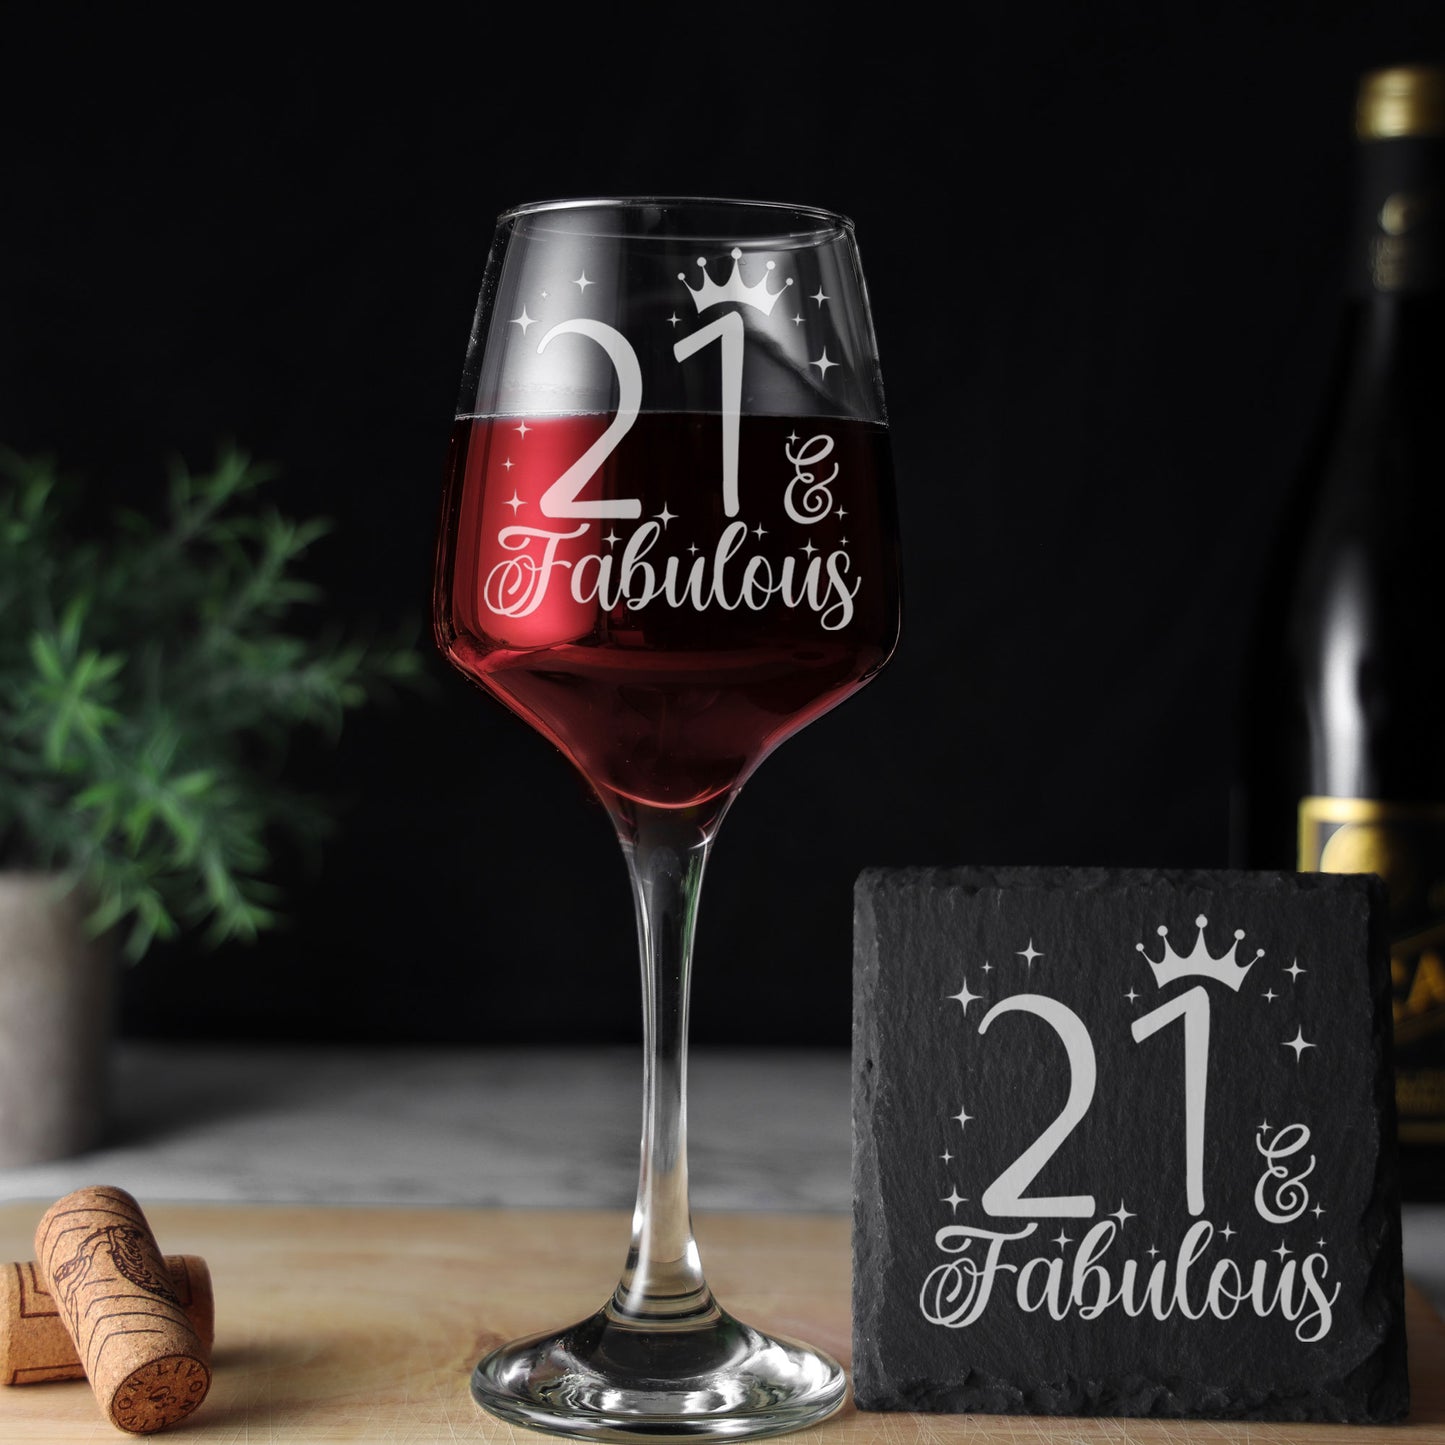 21 & Fabulous 21st Birthday Gift Engraved Wine Glass and/or Coaster Set  - Always Looking Good - Glass & Square Coaster  